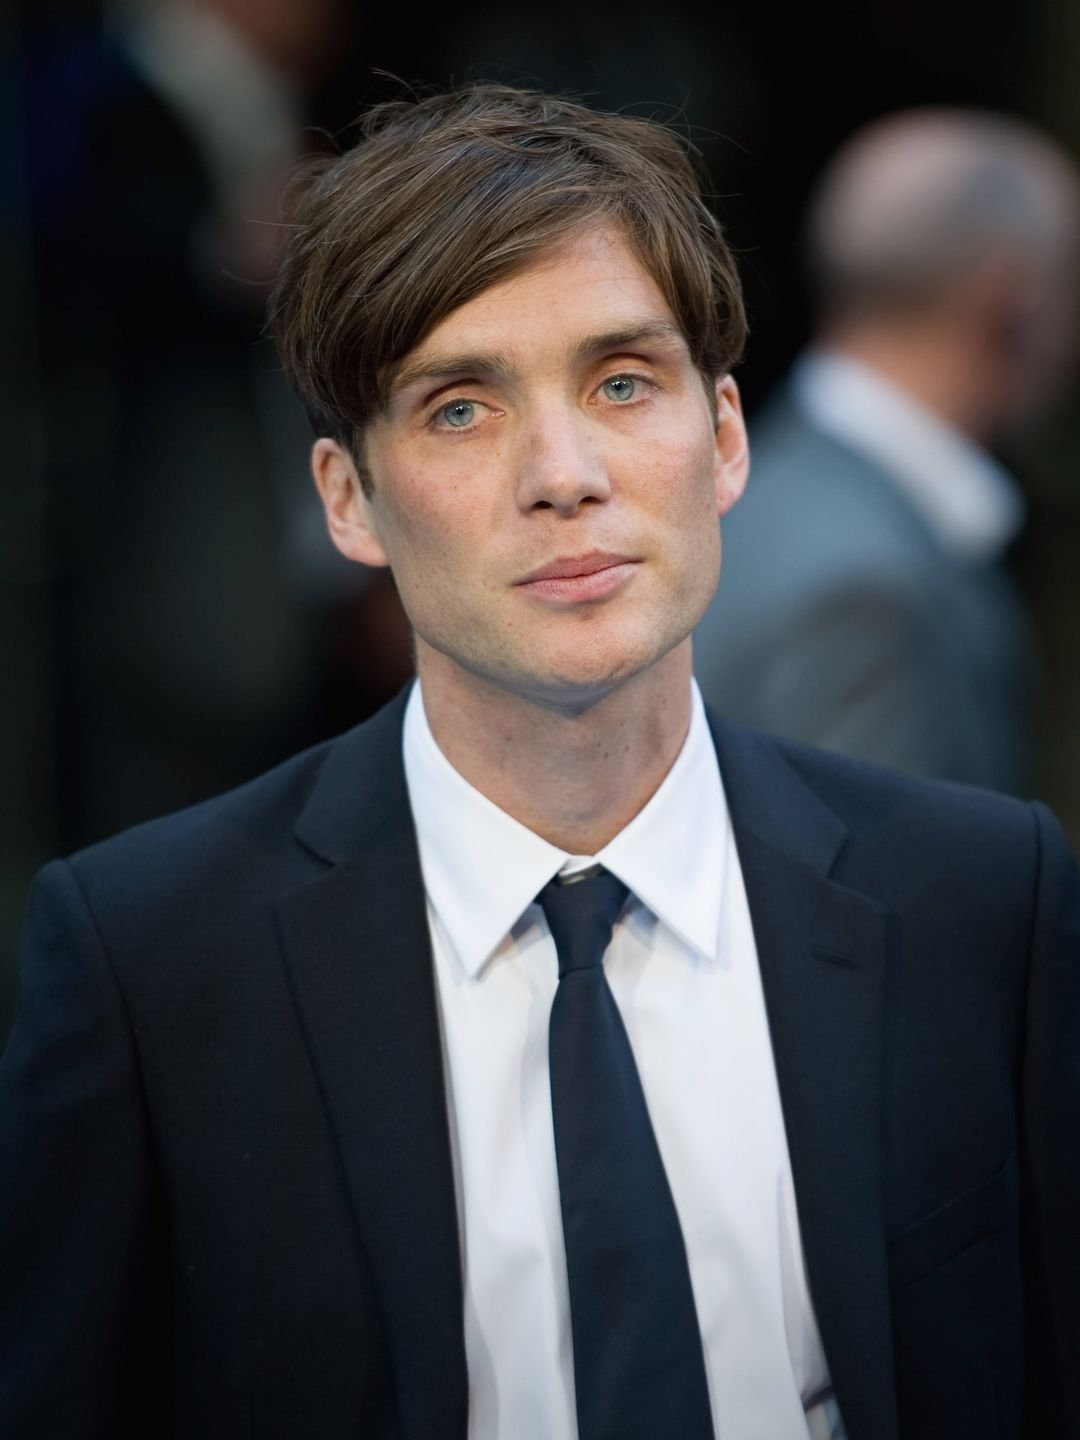 Cillian Murphy does he have a wife